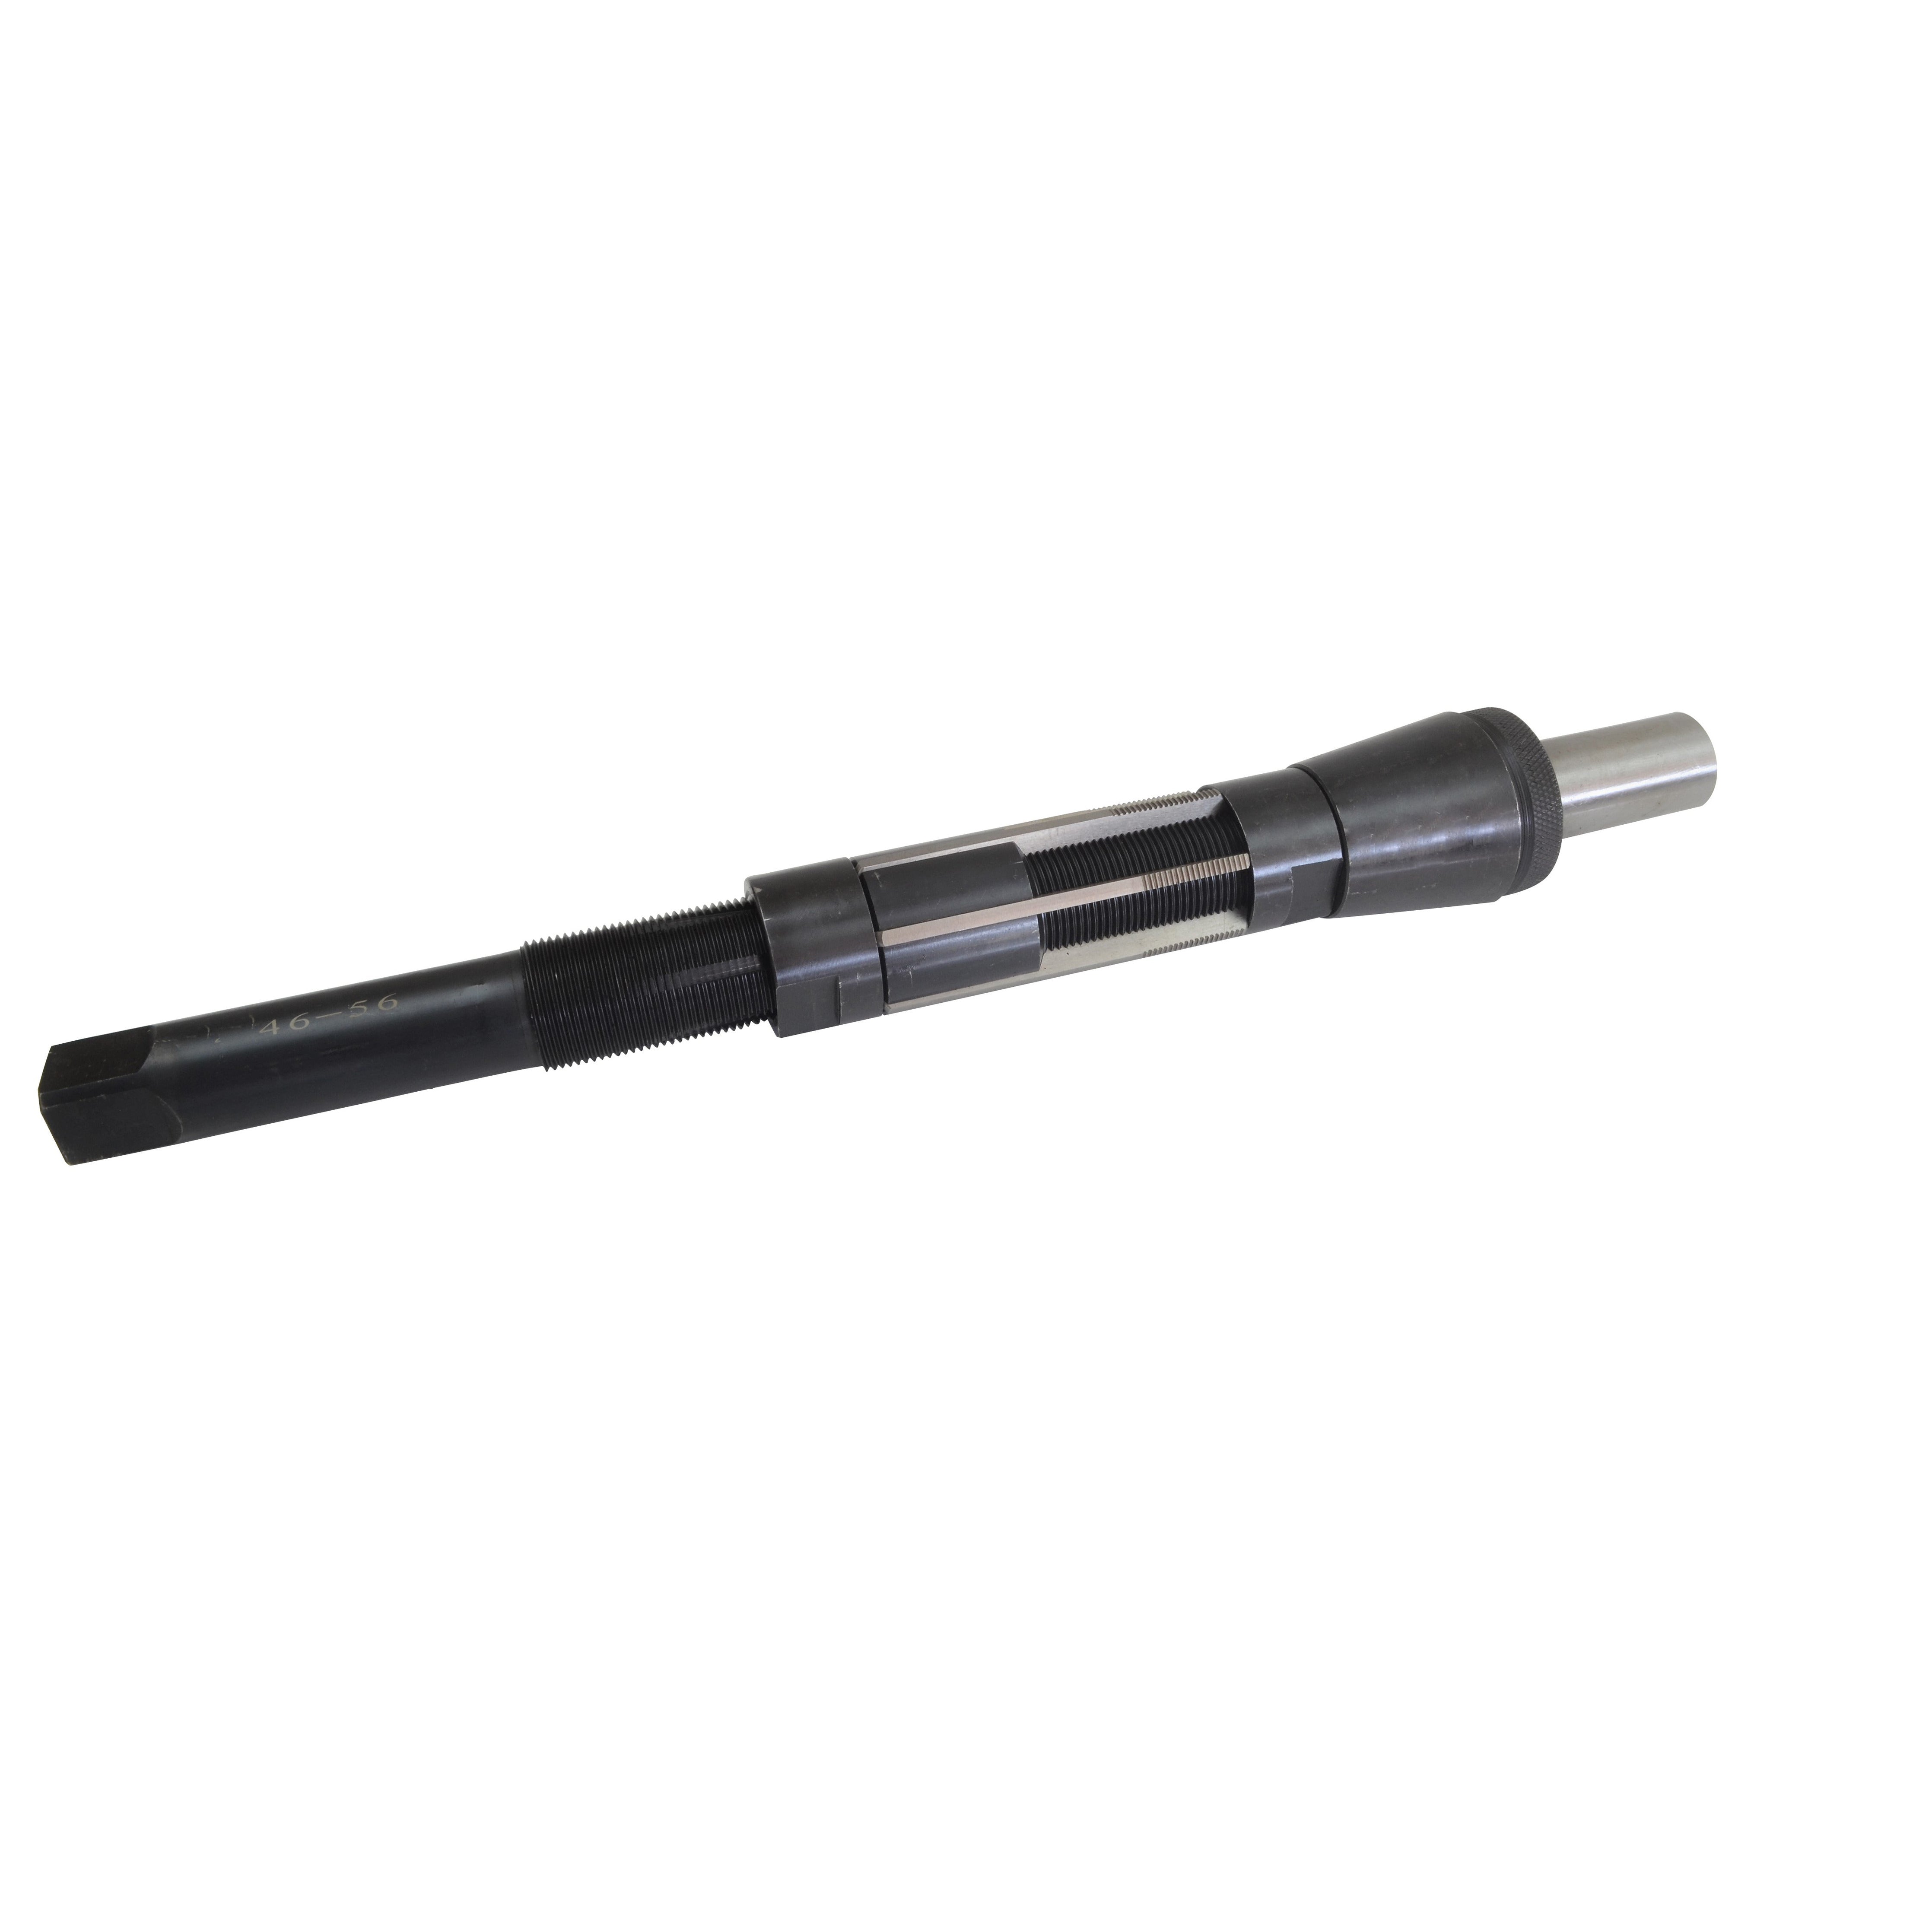 46 - 56mm Adjustable Hand Reamer with Guide